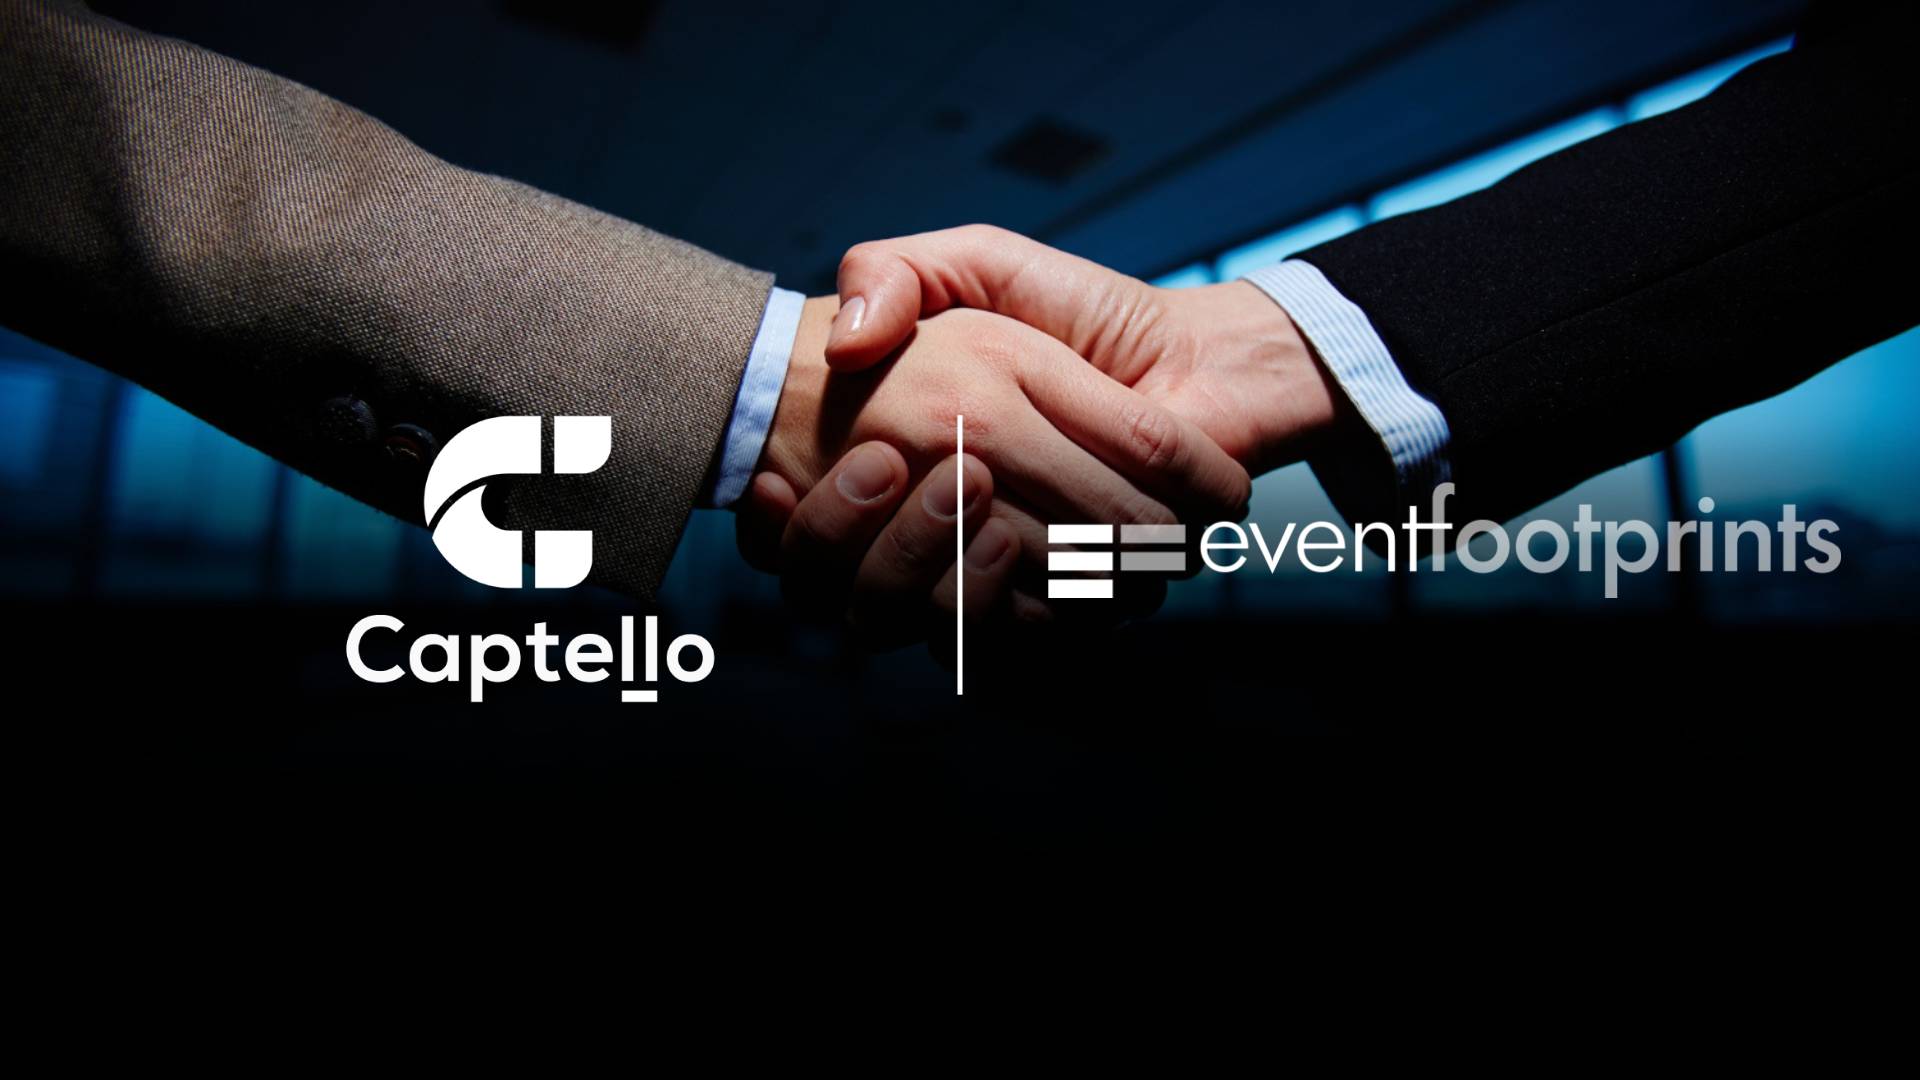 Captello and Event Footprints Revolutionize B2B Event Measurement in Europe